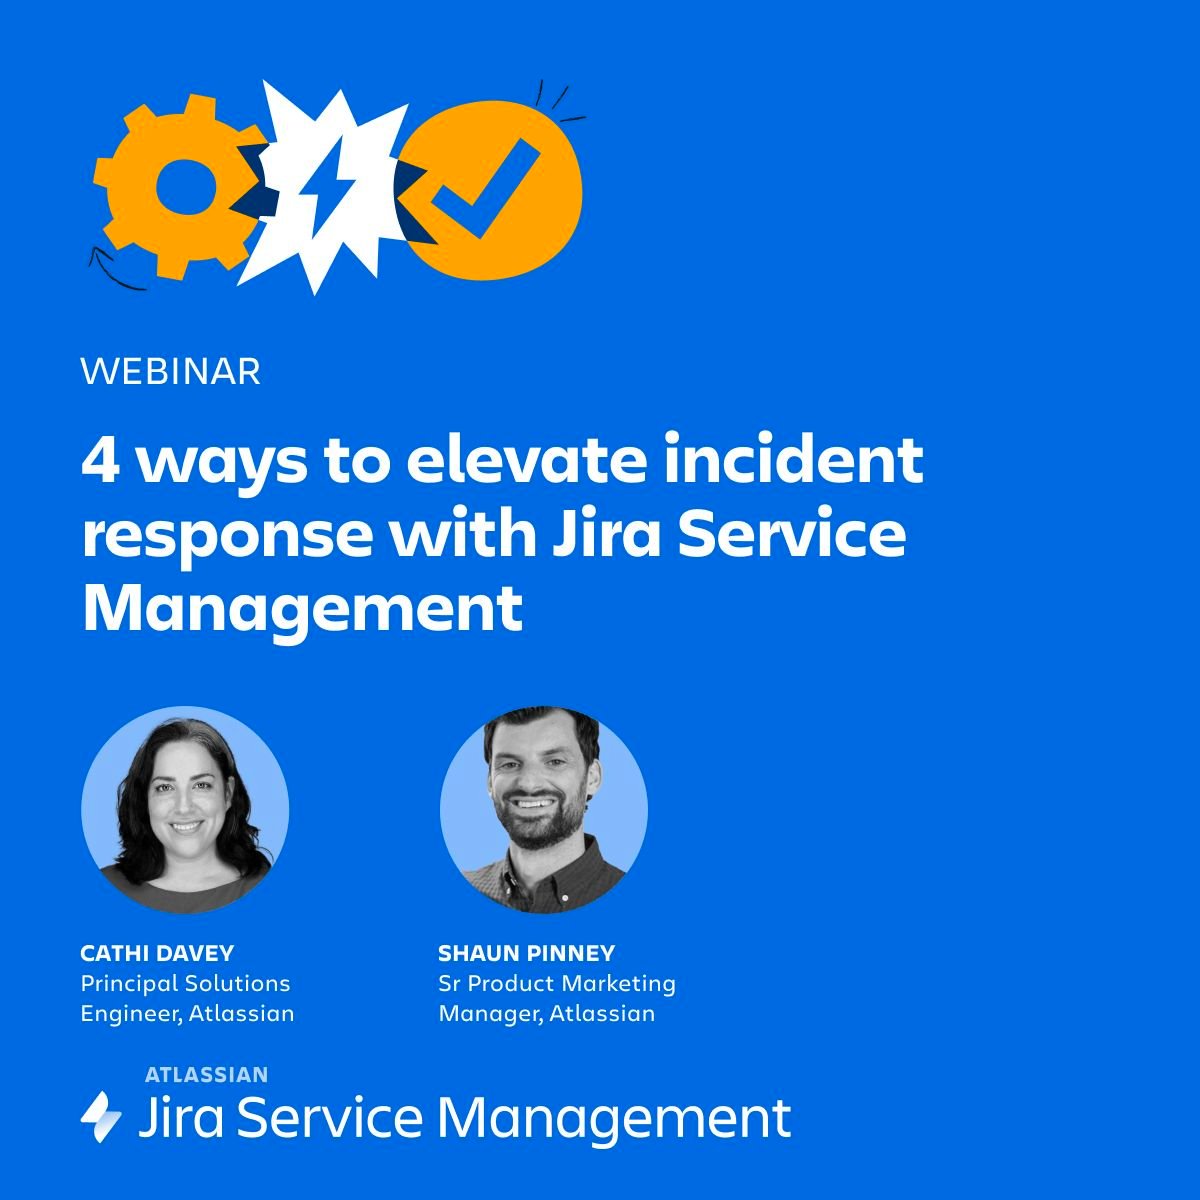 Join us for our upcoming webinar on February 28 to learn how Jira Service Management can help your team accelerate end-to-end incident resolution and collaborate across Dev, Ops, and support on one platform. Register here: atlassian.com/webinars/it/el…*